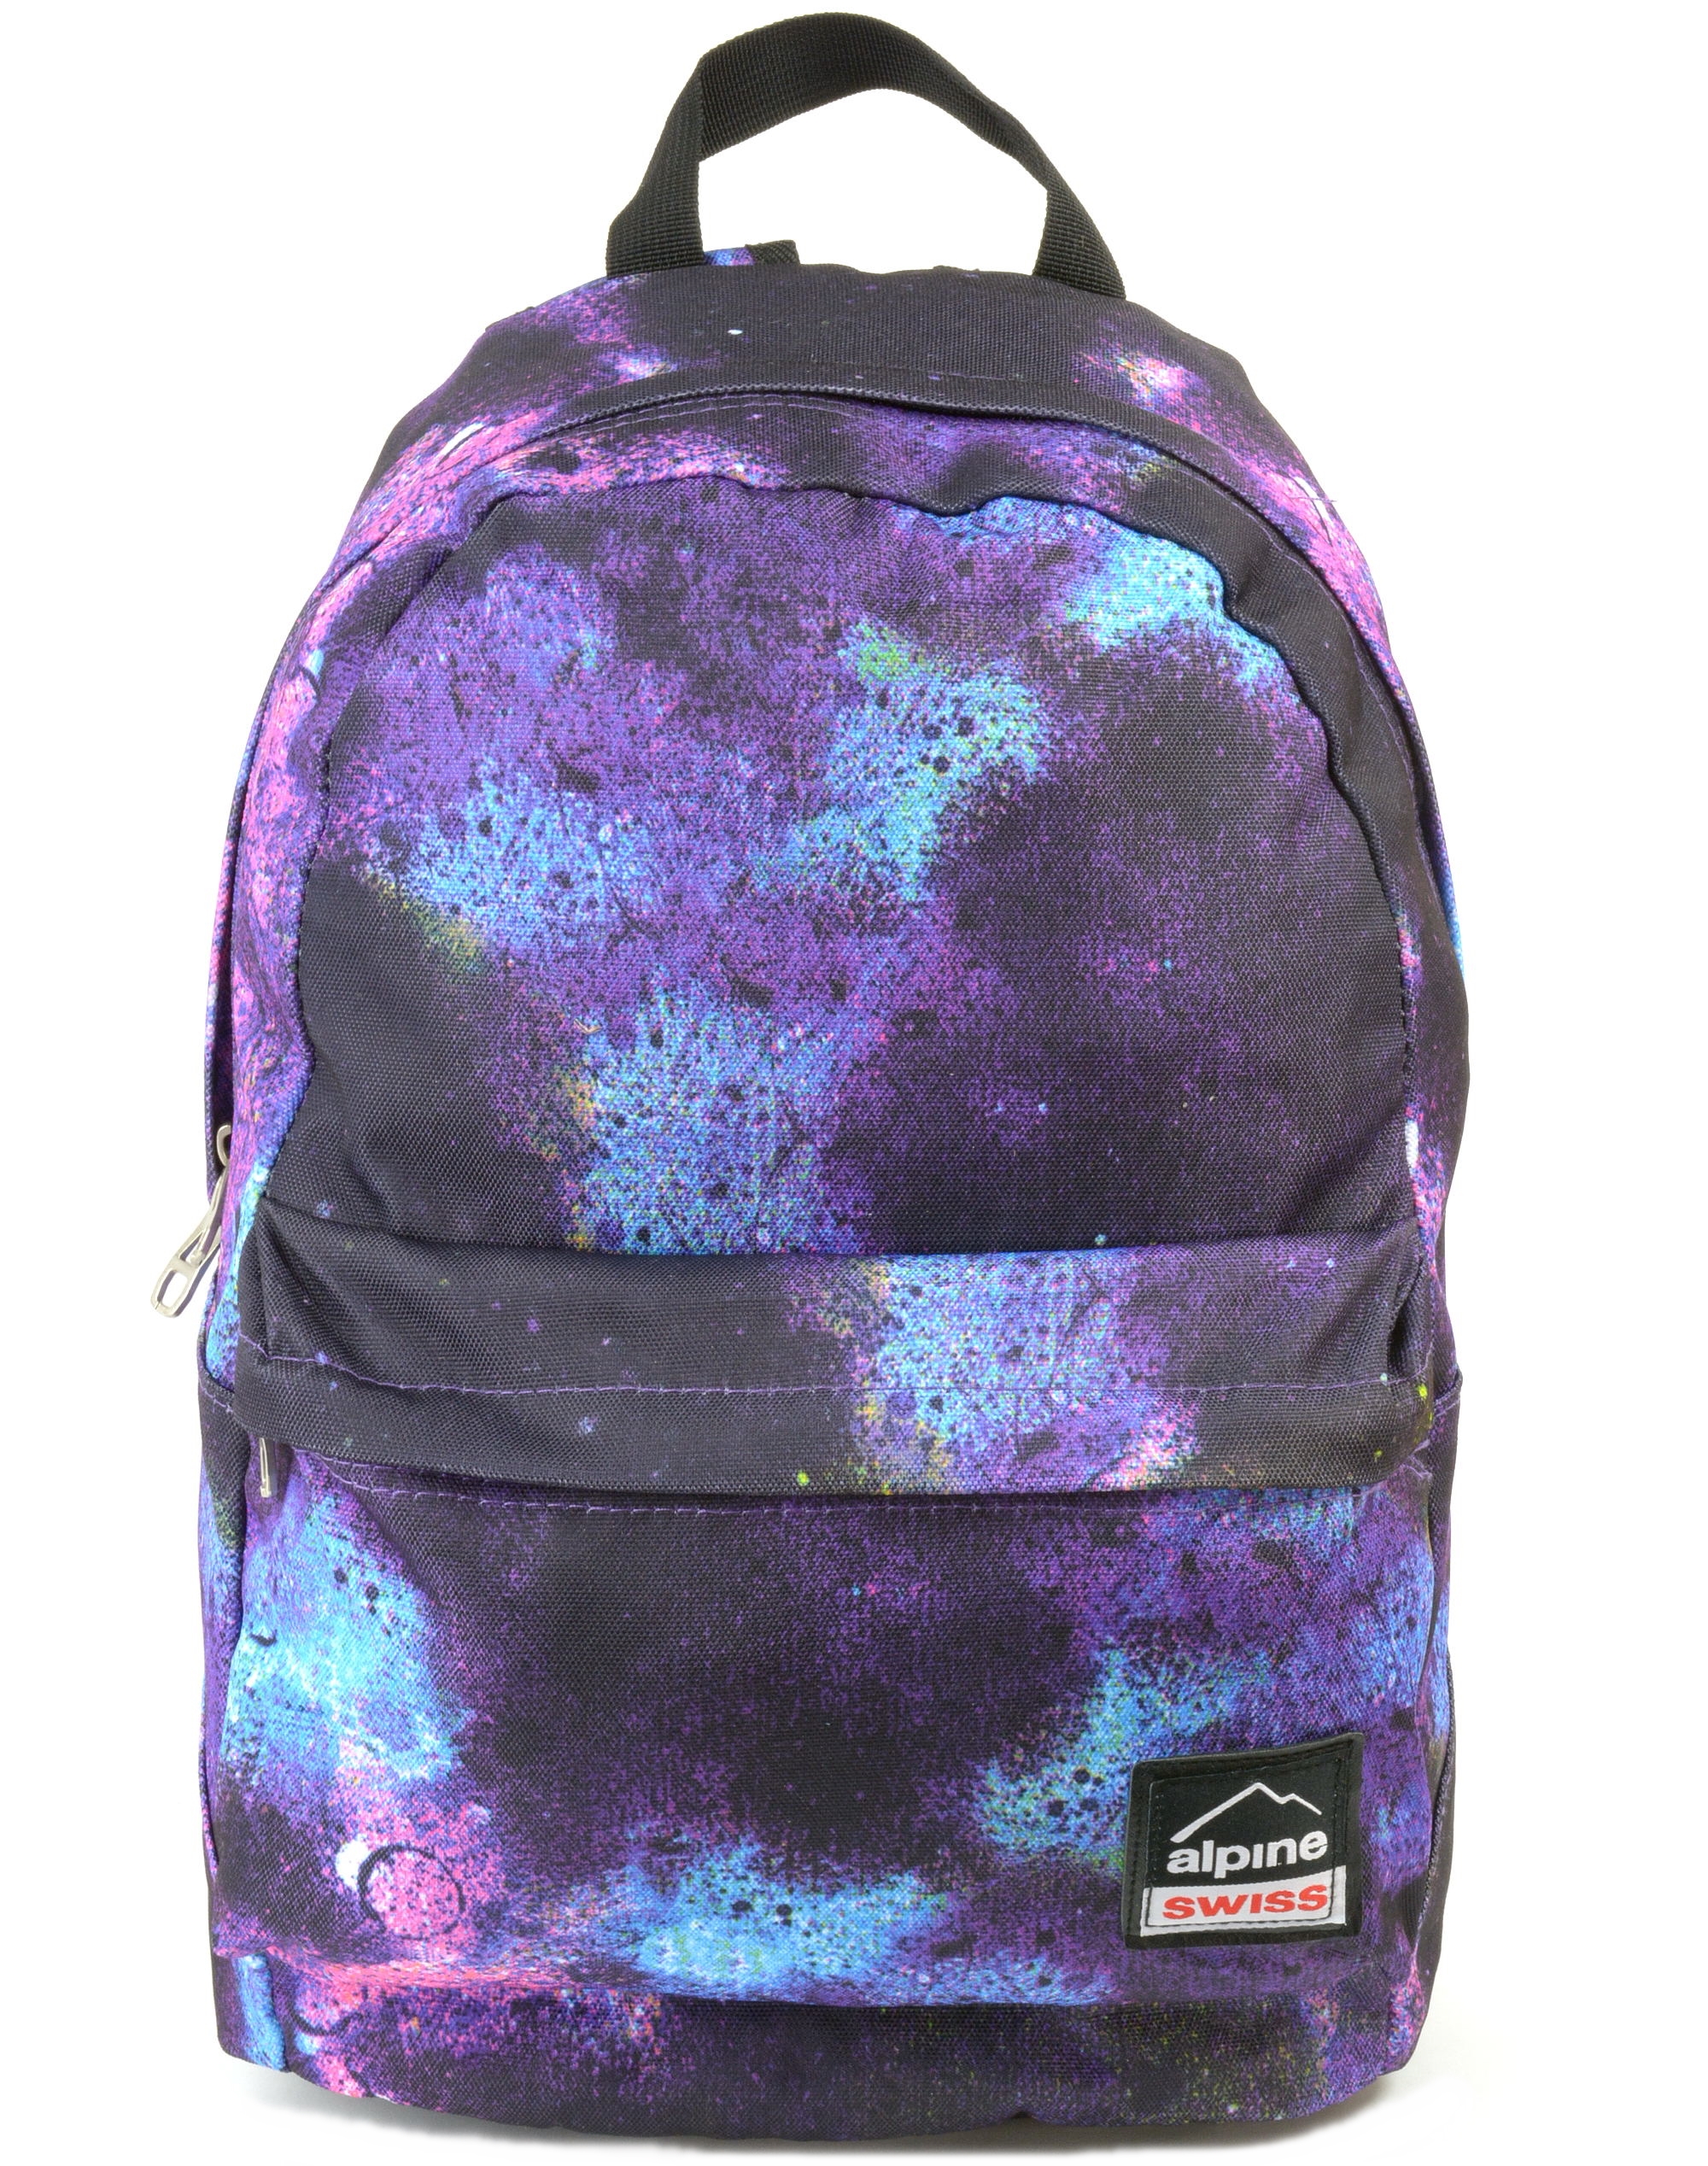 Alpine Swiss Midterm Backpack Just $14.99 + B1G1 10% OFF and FREE Shipping!